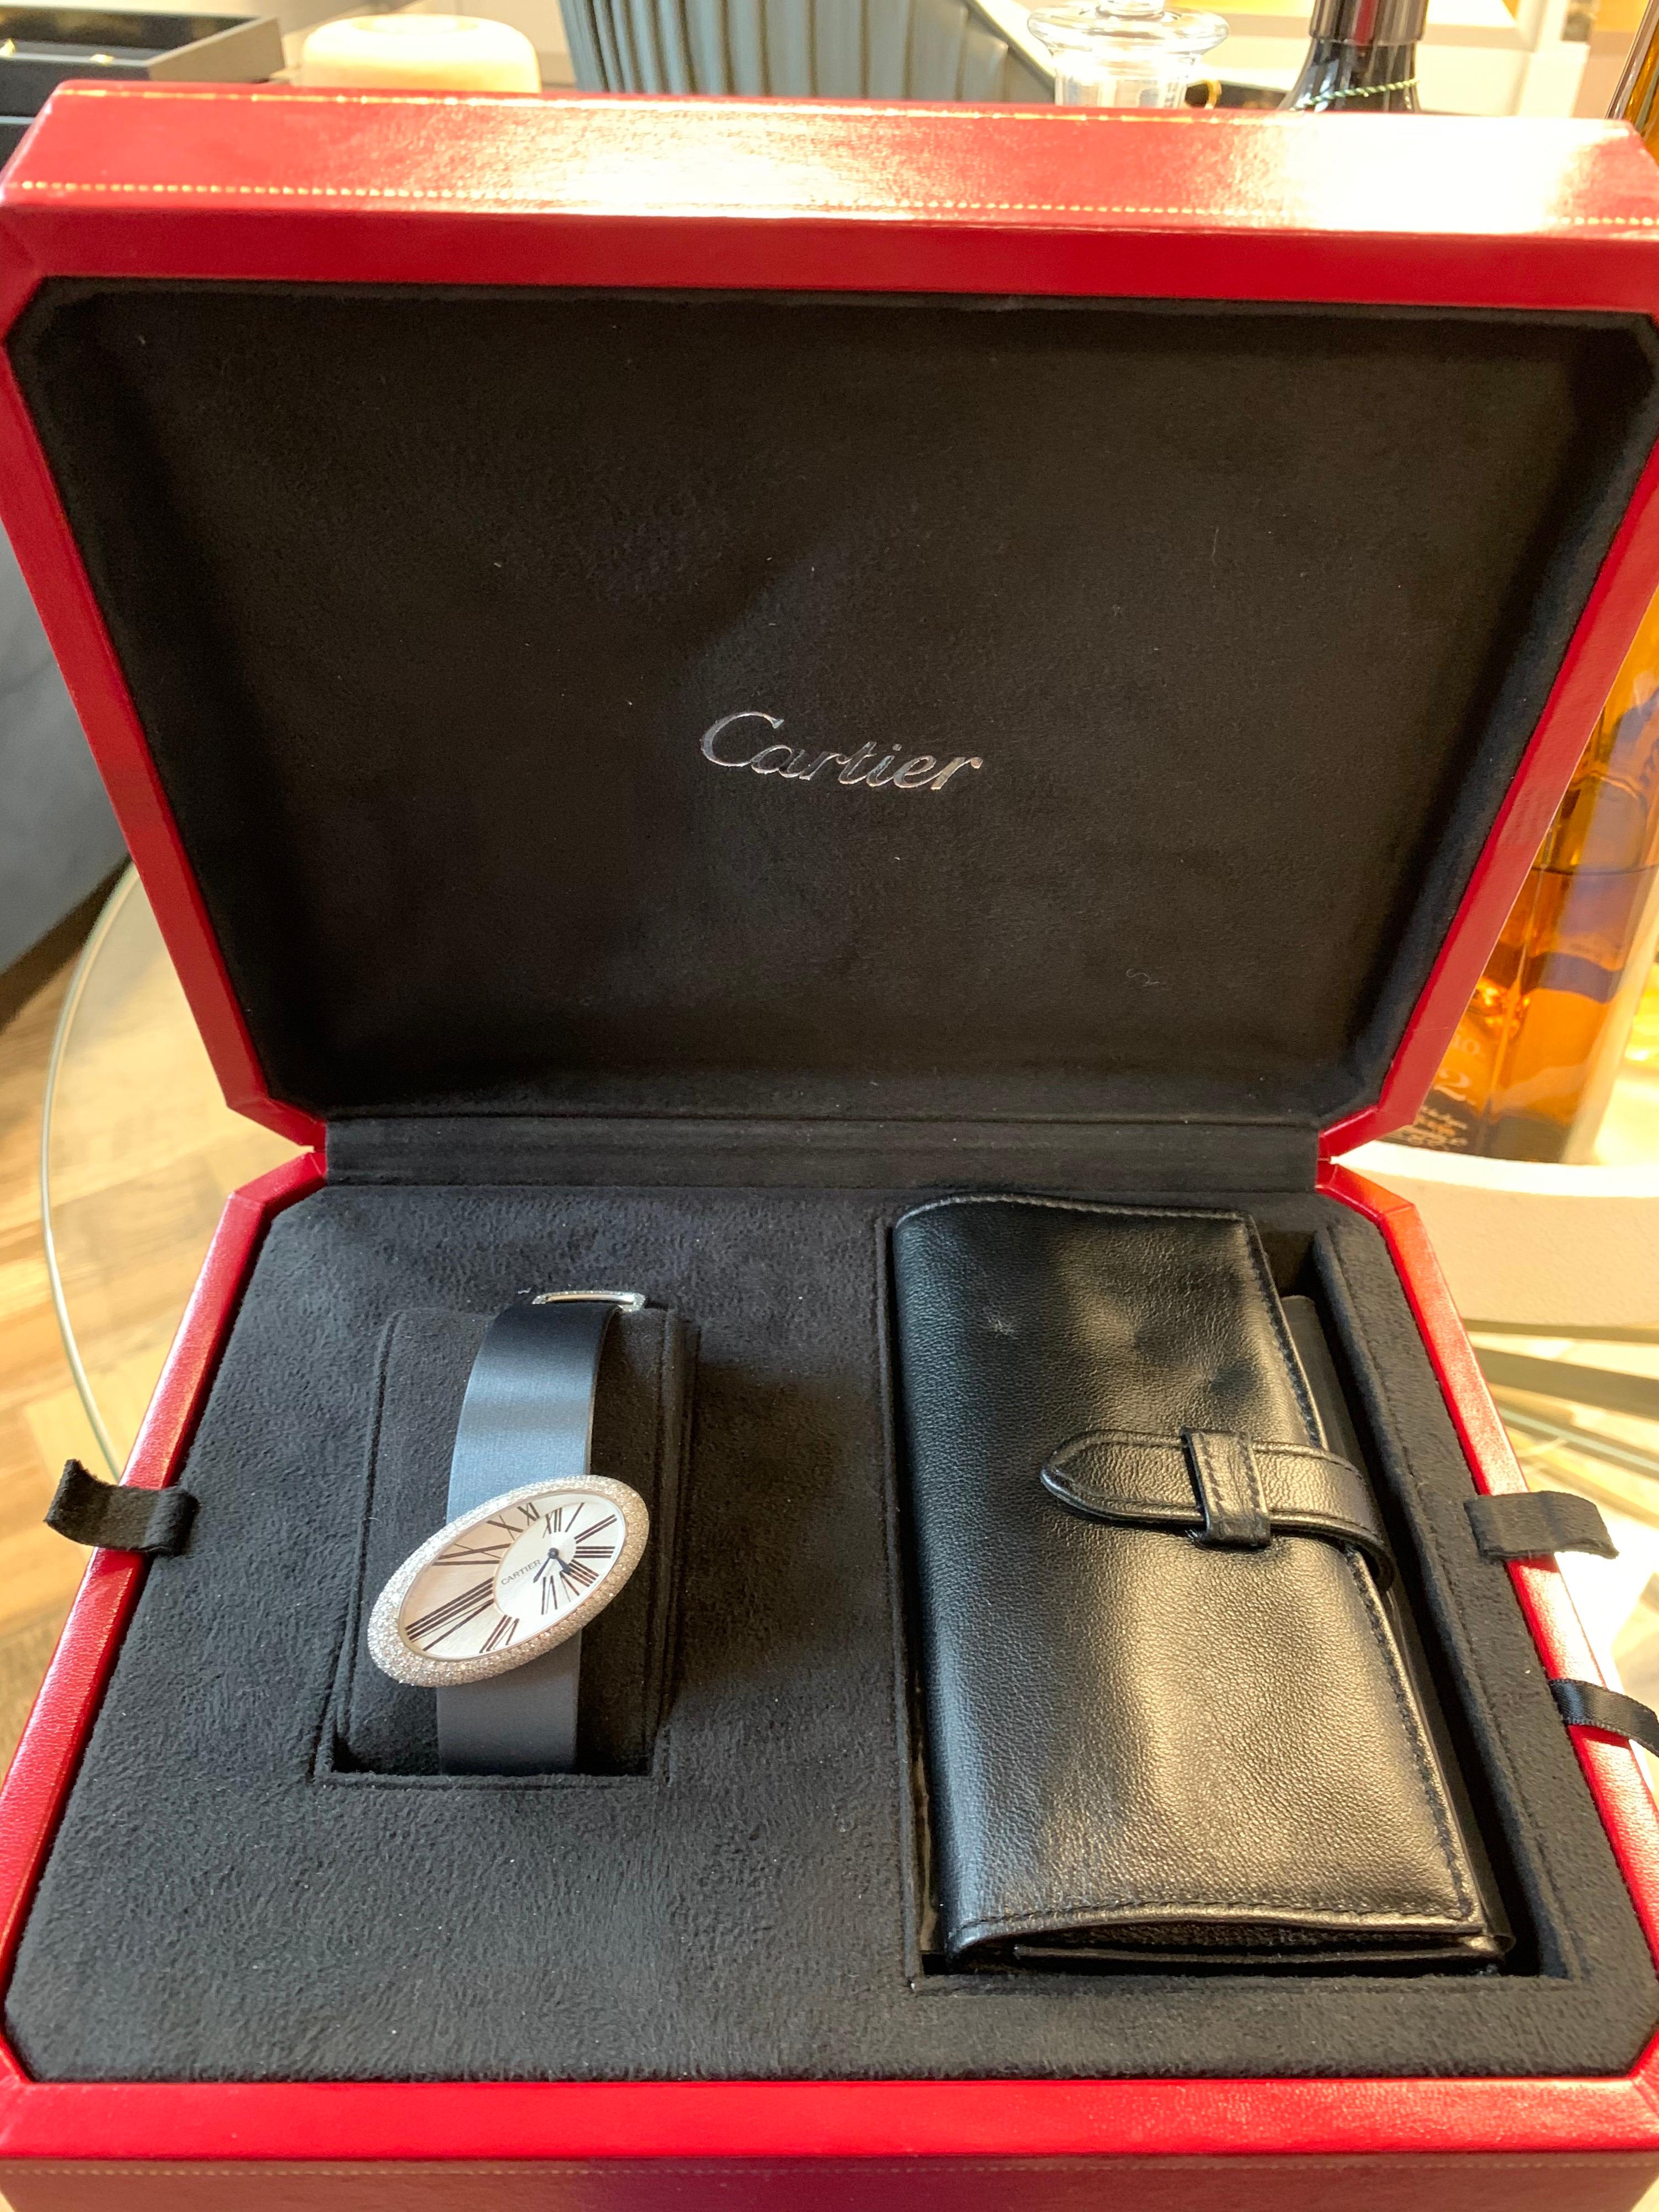 Rare Cartier women’s watch. This very rare watch from the legendary house of Cartier features elongated oval case in 18k white gold bezel set with round brilliant cut E-F color VS clarity Diamonds. 
This collectors item can be worn as a piece of